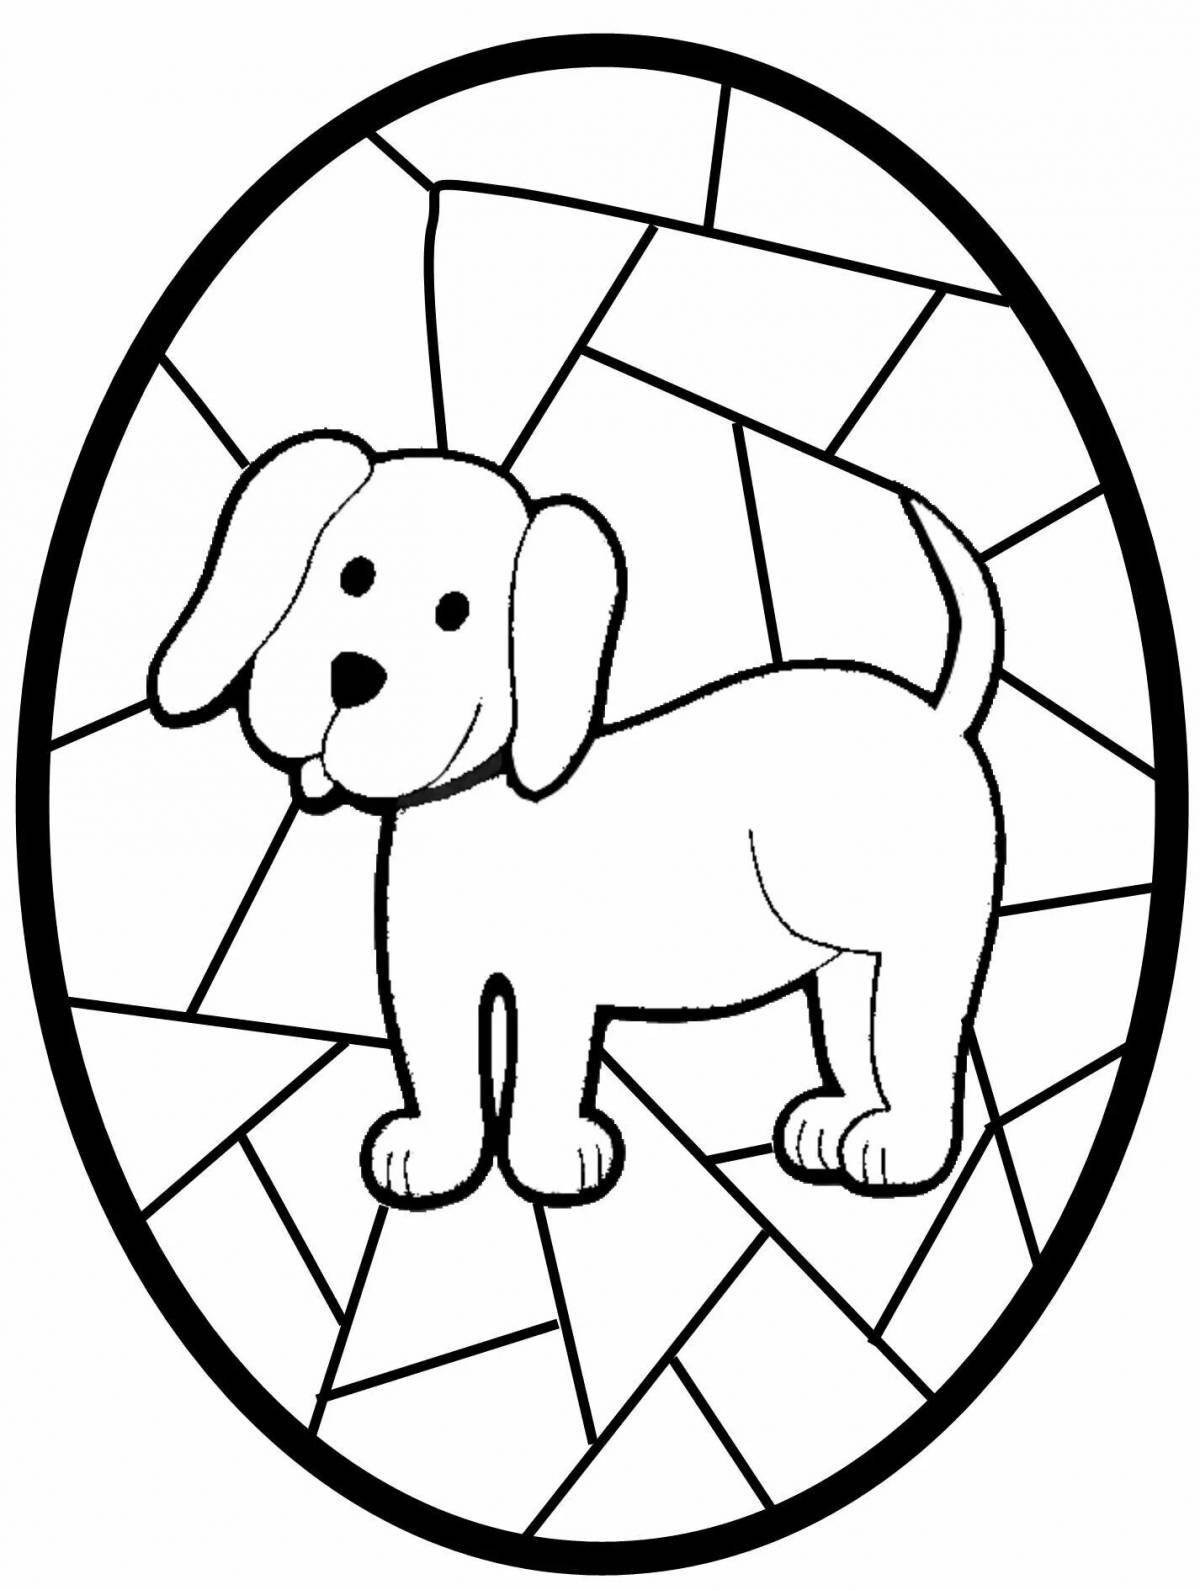 Dazzling Stained Glass Coloring Page